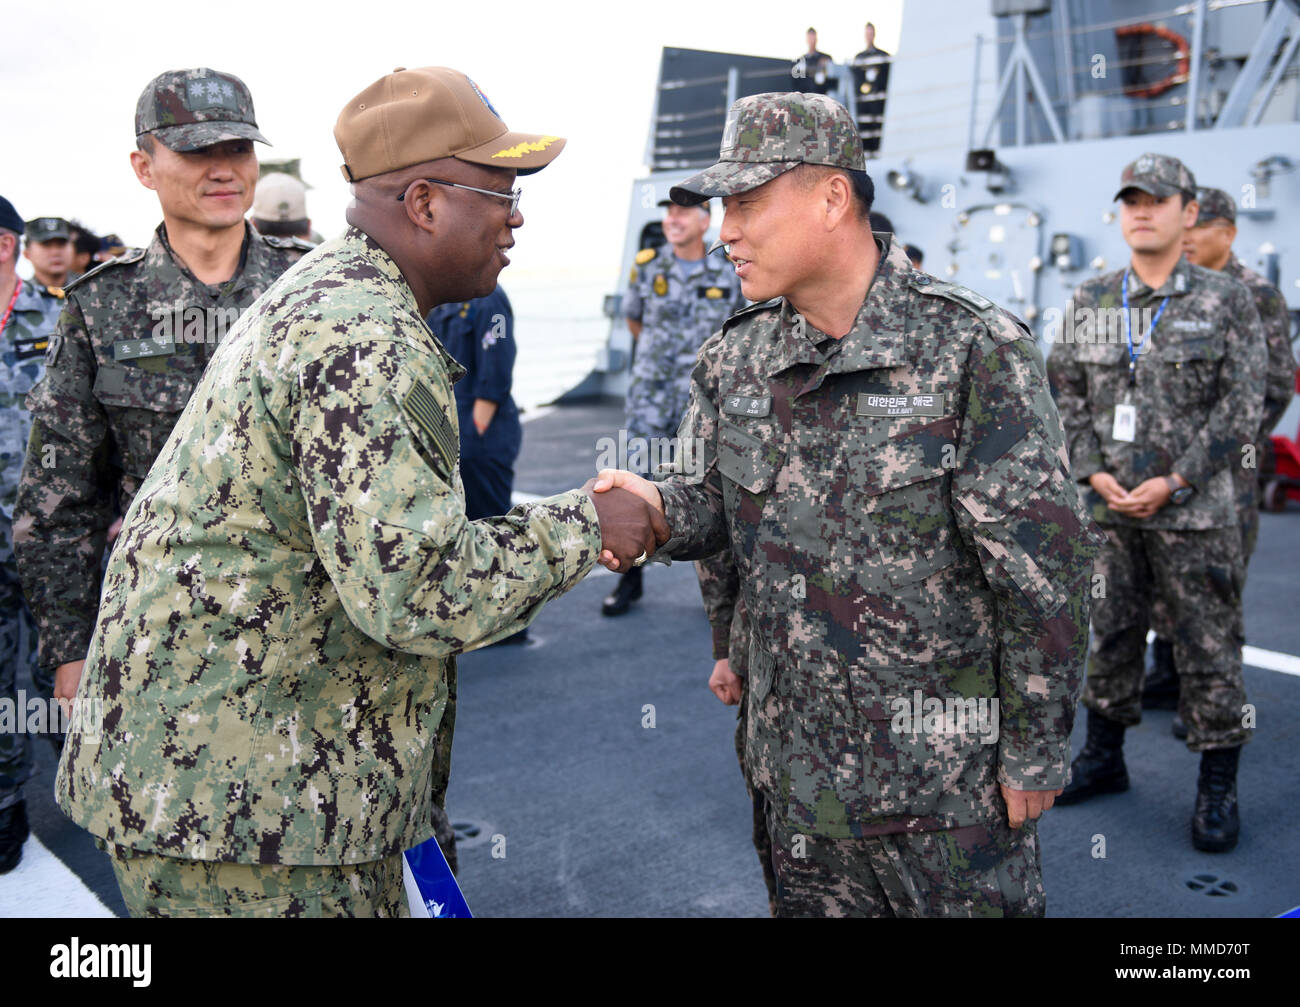 171019-N-TB148-582 BUSAN, Republic of Korea (Oct. 19, 2017) Capt. Glen Leverette, deputy commander, U.S. Naval Forces Korea (CNFK) shakes hands with Republic of Korea (ROK) navy Rear Adm. Kim, Jong Sam, commander, ROK Flotilla 5, aboard the ROKS Cheong Wang Bong (LST 686) during the annual Multinational Mine Warfare Exercise (MN MIWEX). MN MIWEX is a mine countermeasures exercise between the U.S., Republic of Korea, and U.N. Command Sending States meant to increase combined capabilities and readiness to respond to any contingency on the Korean peninsula. (U.S. Navy photo by Mass Communication  Stock Photo